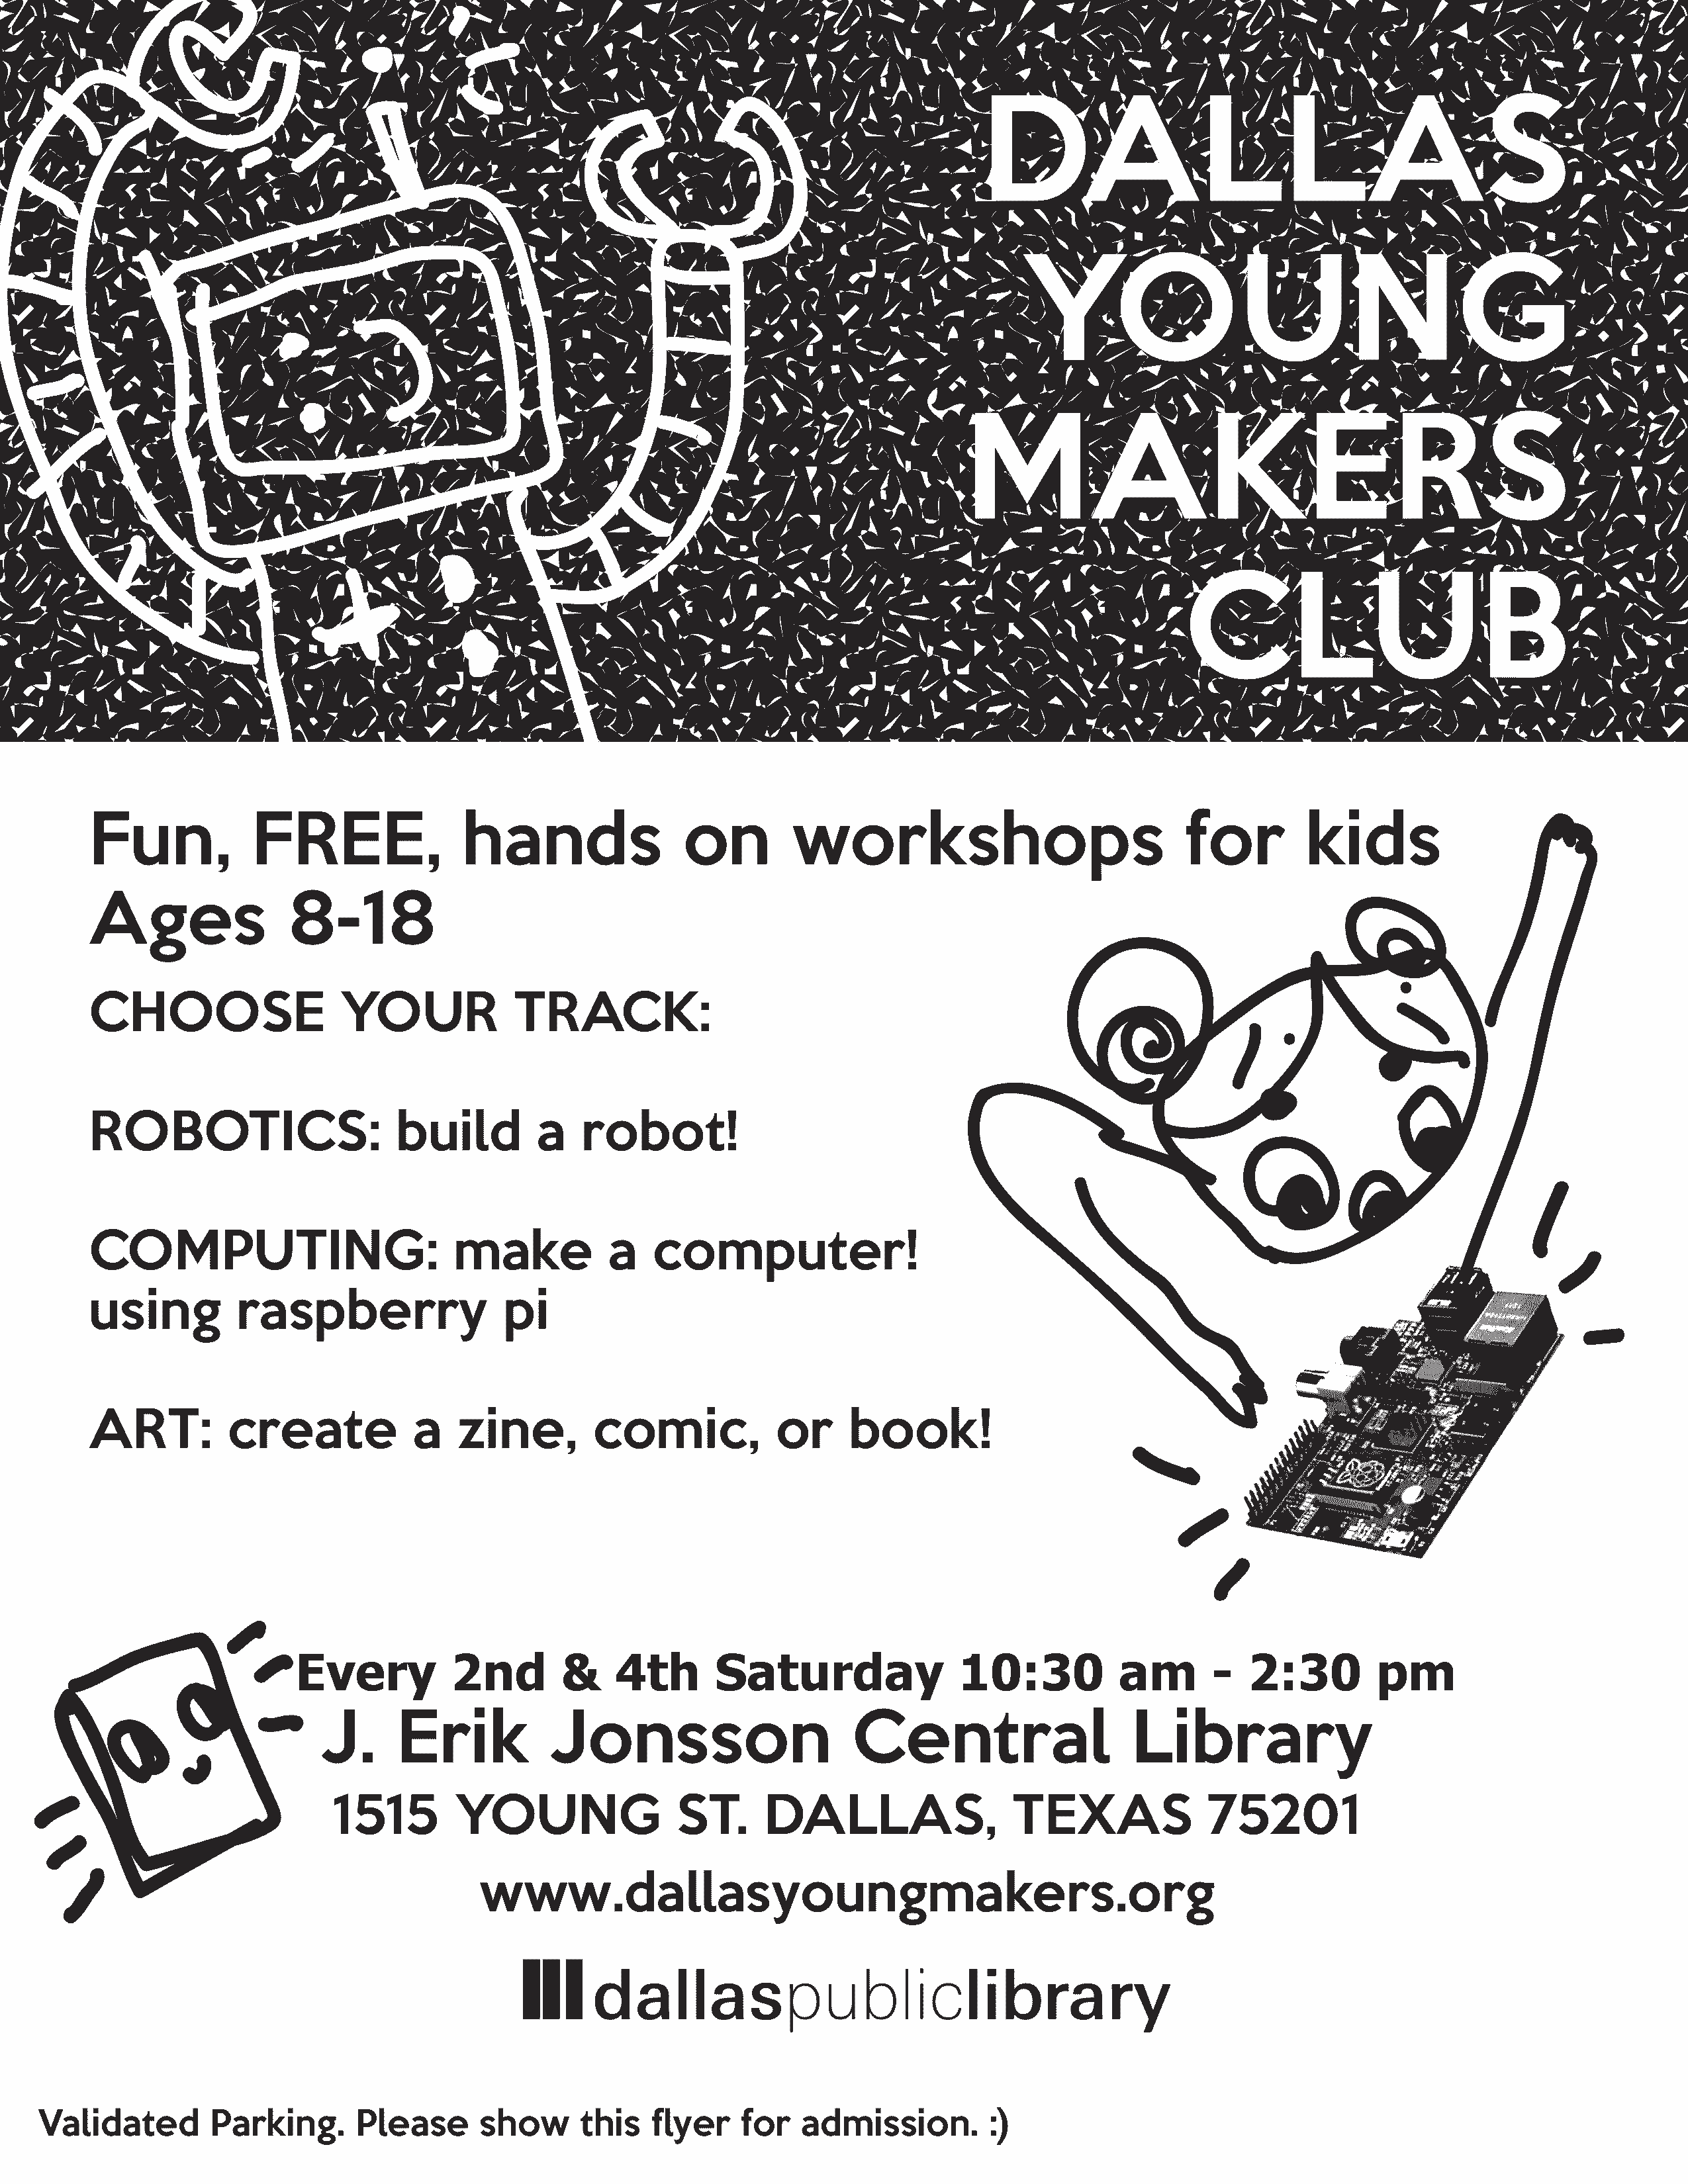 Dallas Young Makers every 2nd and 4th Saturday at the Central Library